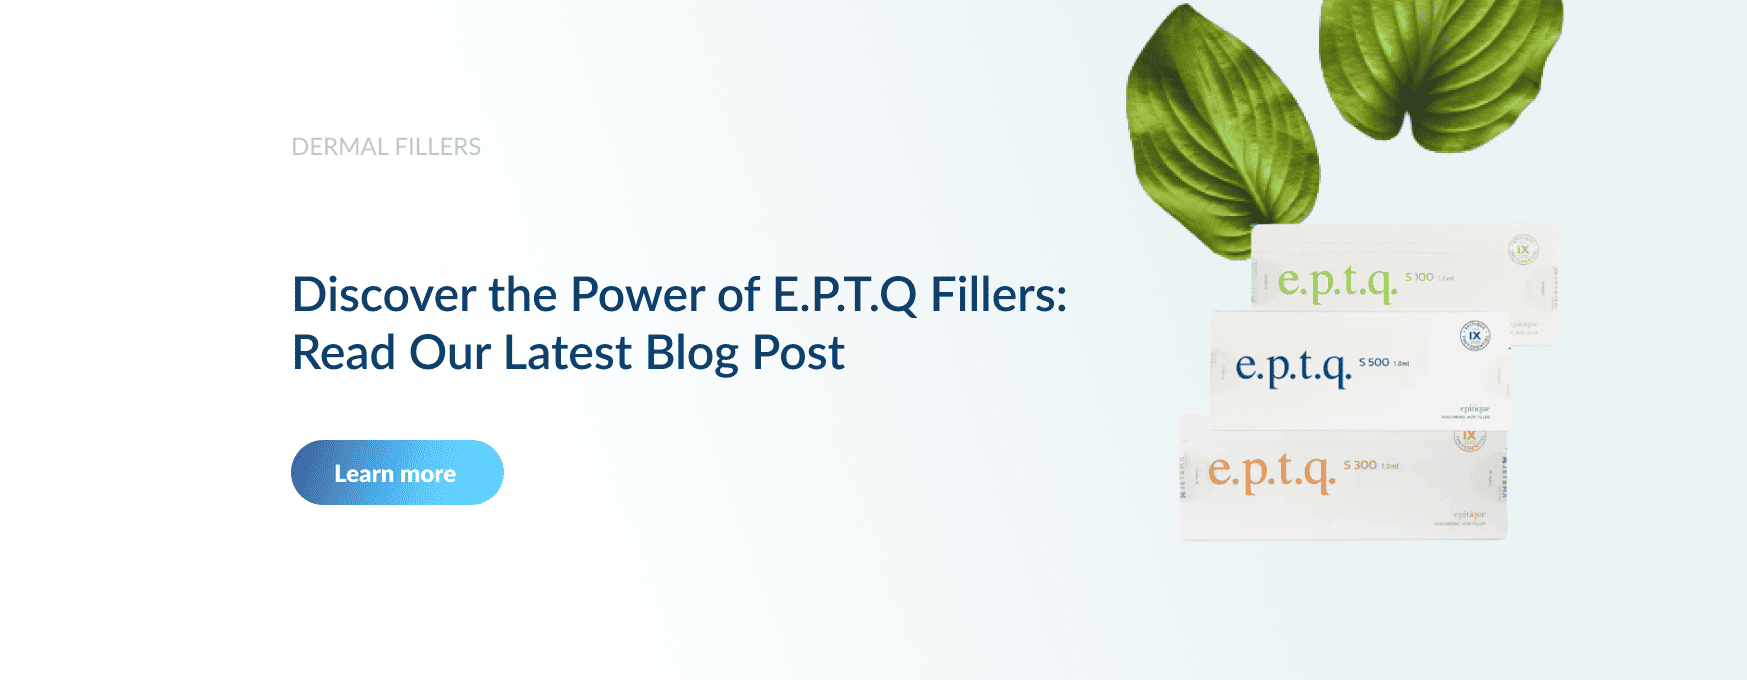 Discover the Power of E.P.T.Q Fillers S100, S300, S500 - desktop